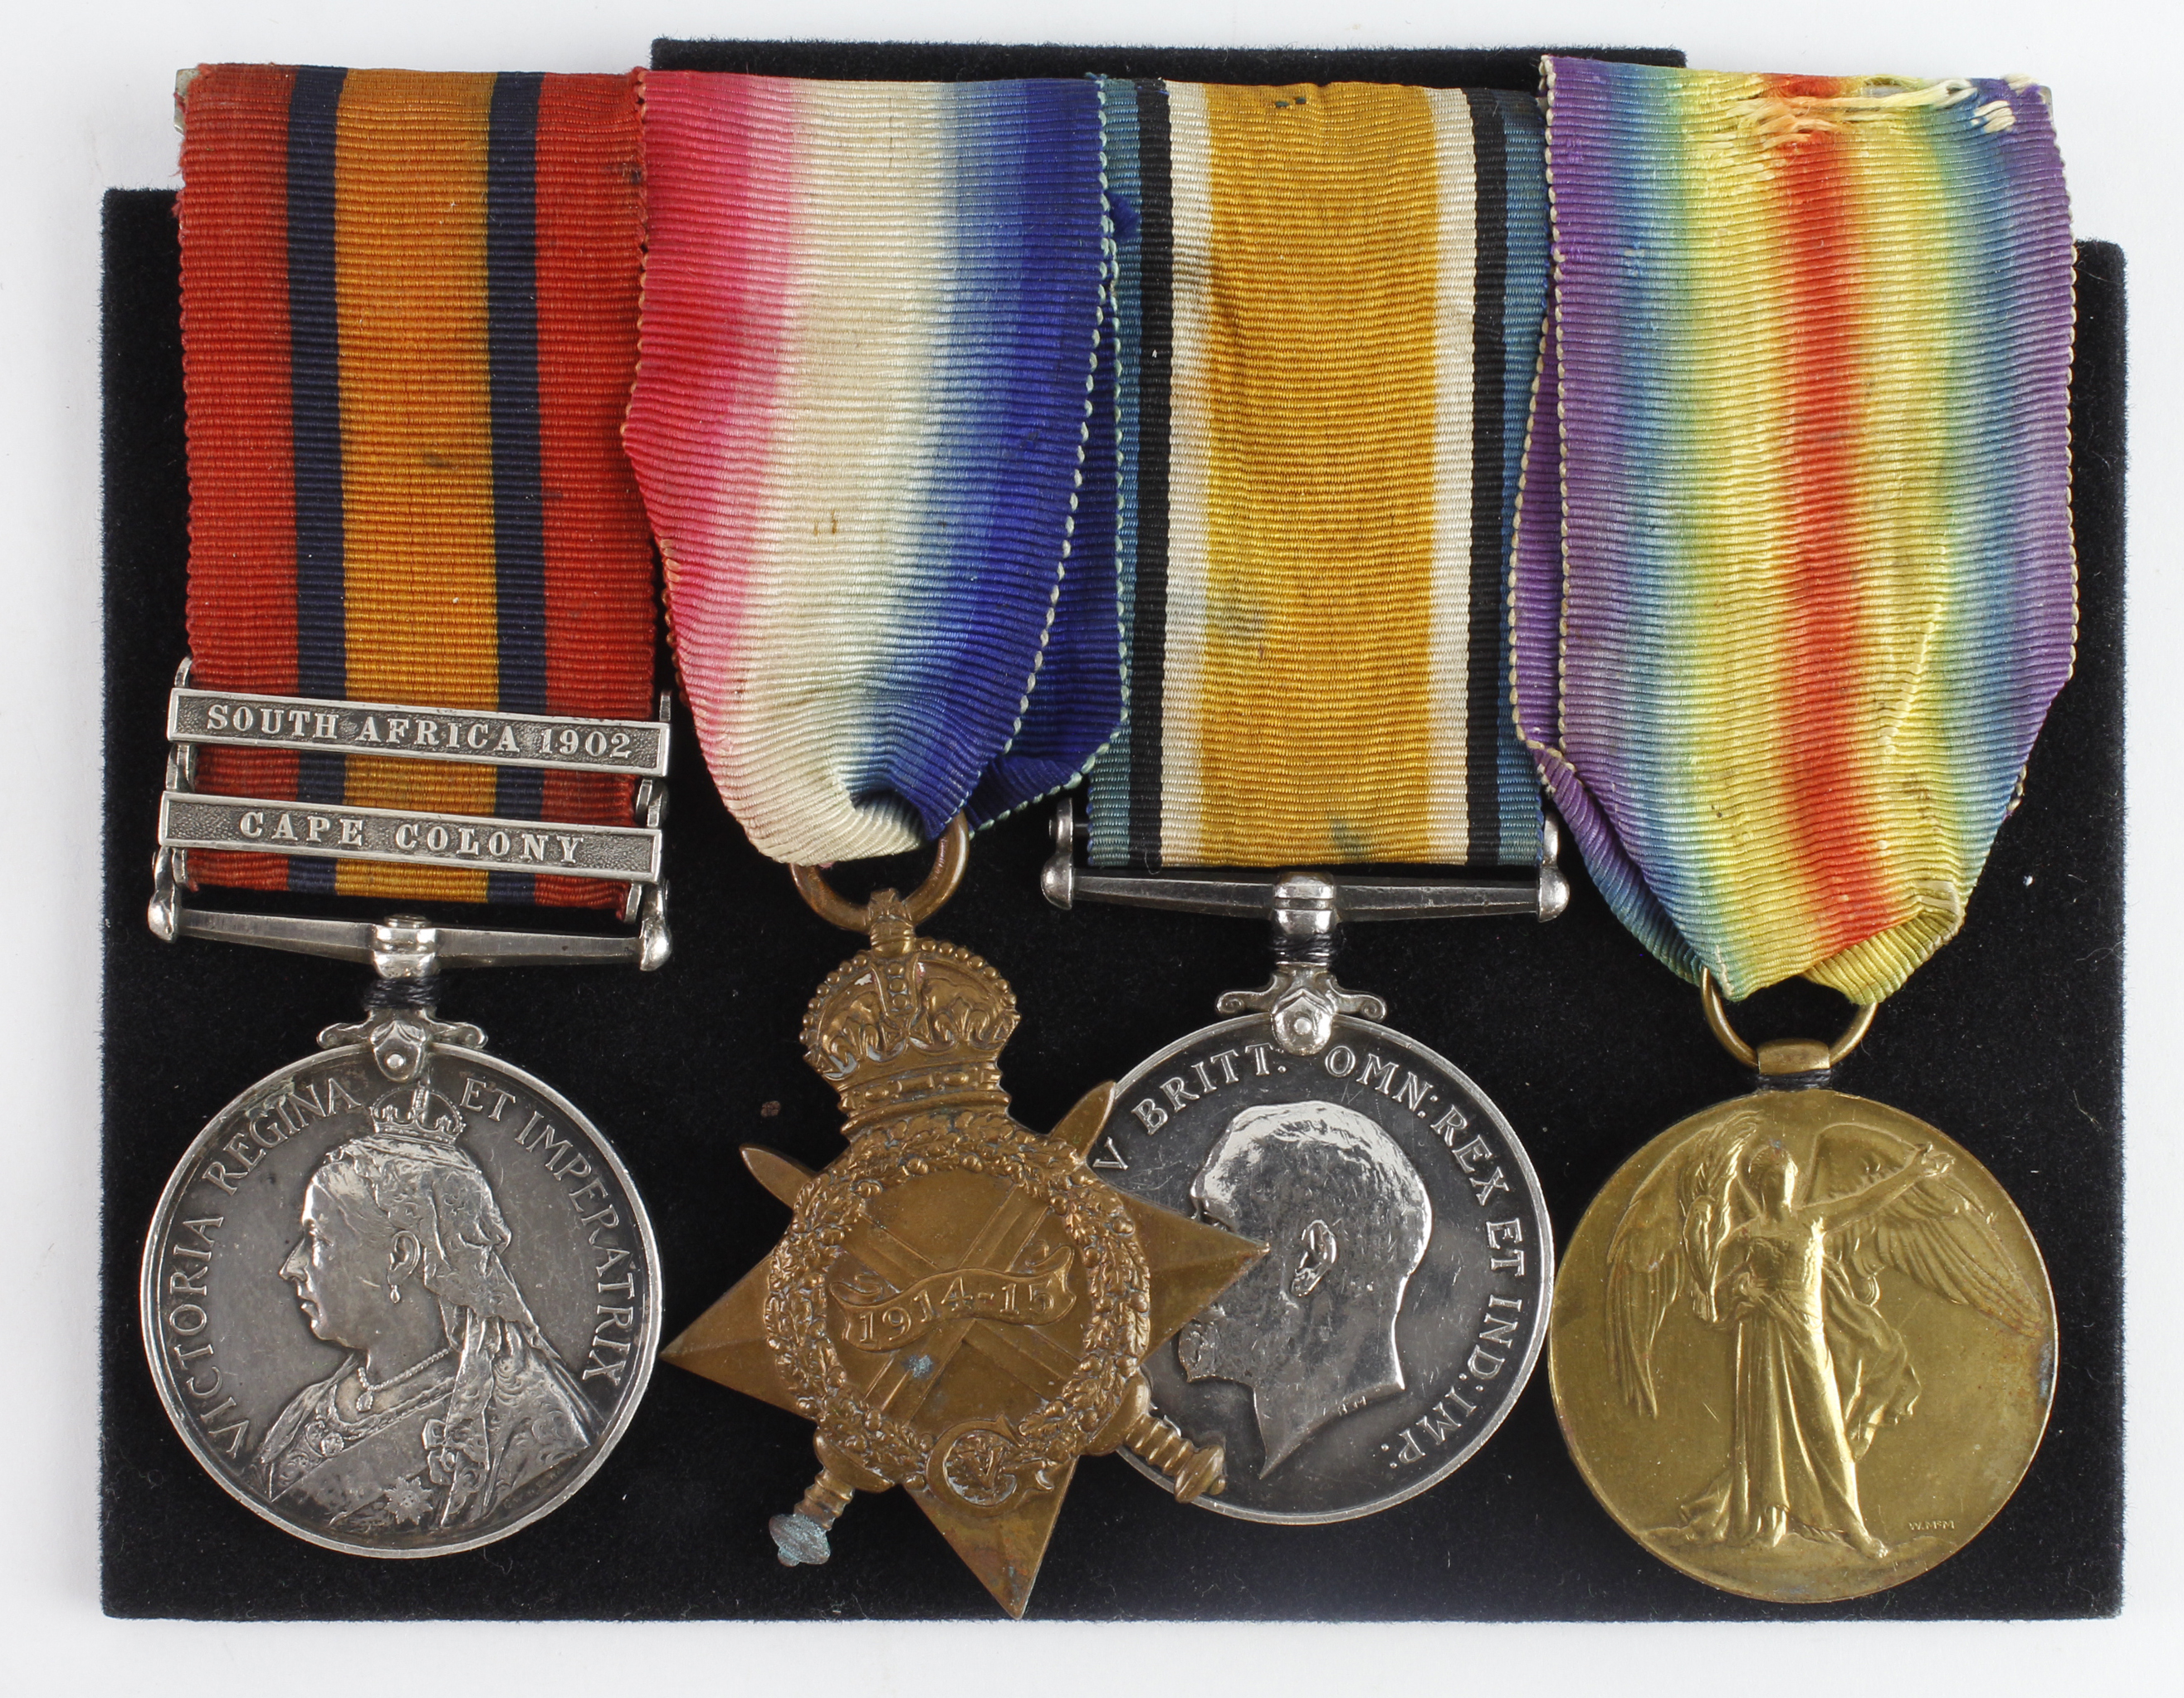 QSA with bars CC/SA02 (39816 Pte B Dodds 141st Coy Imp Yeo) Fincastles Horse, and 1915 Star Trio (